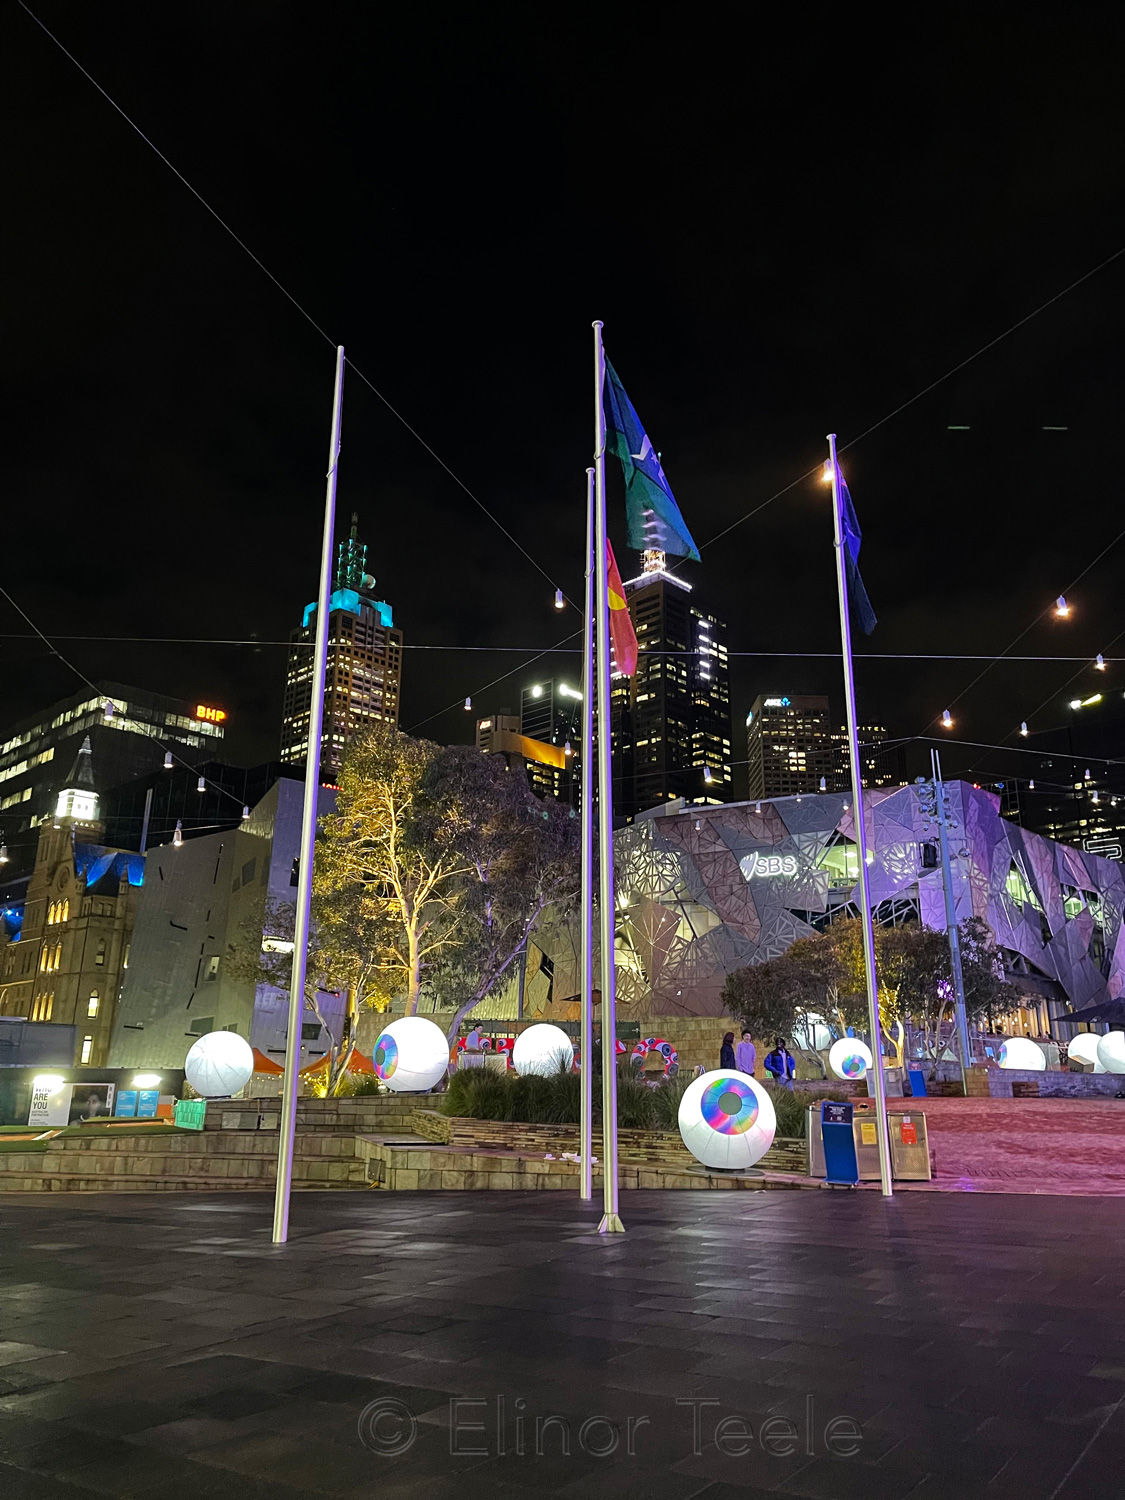 Federation Square at Night, Melbourne